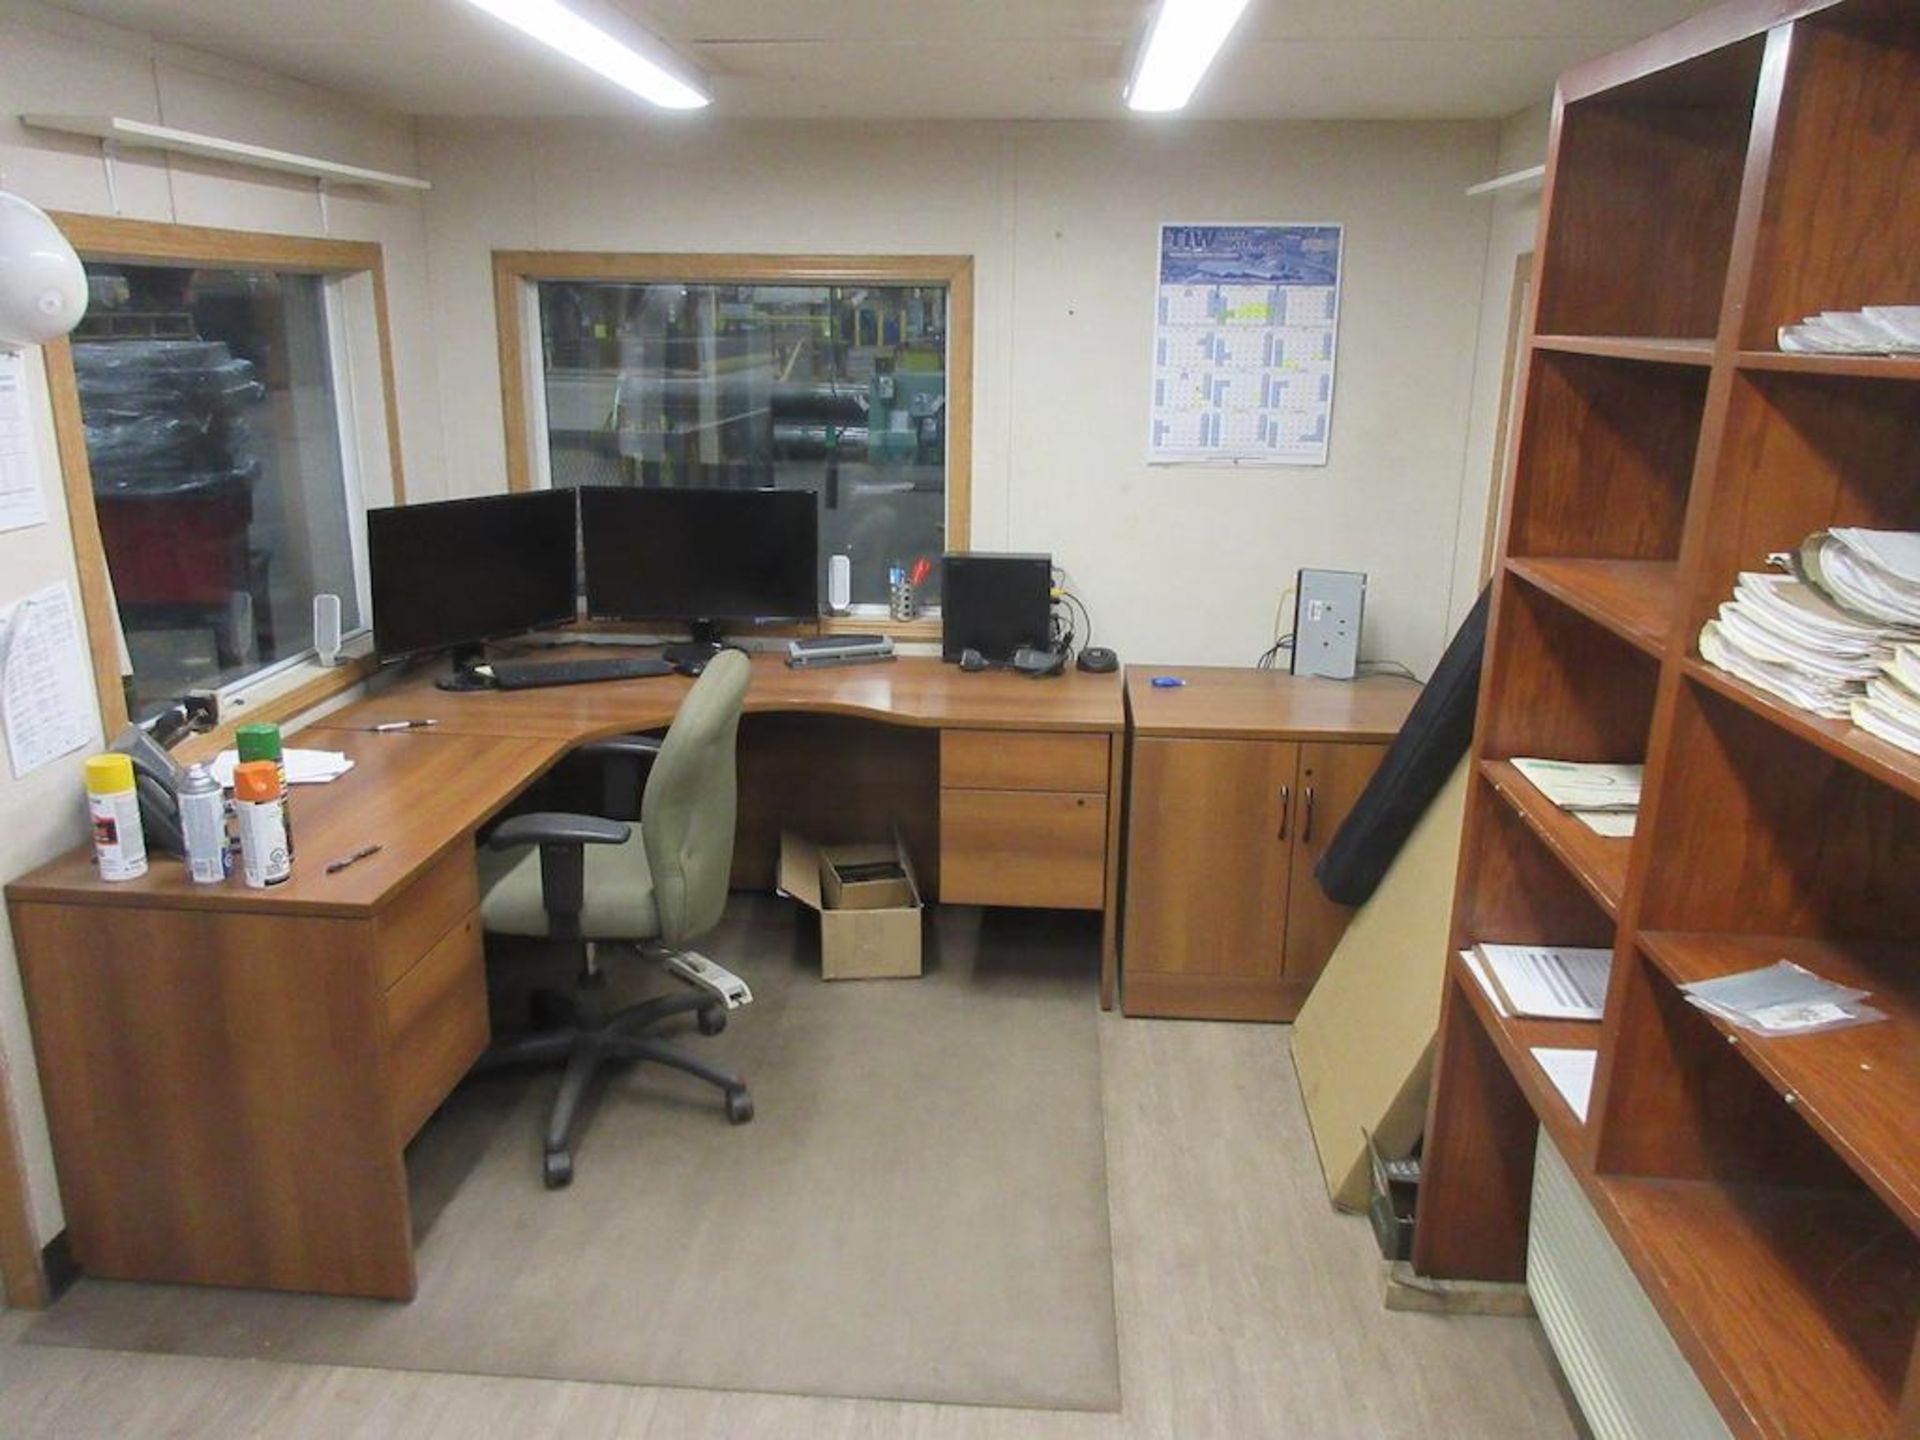 2011 DESIGN SPACE TRAILERS 10' X 16' PORTABLE OFFICE, SN 1253, INCLUDES 2 DESKS, 2 CHAIRS, 2 FILING - Image 3 of 4